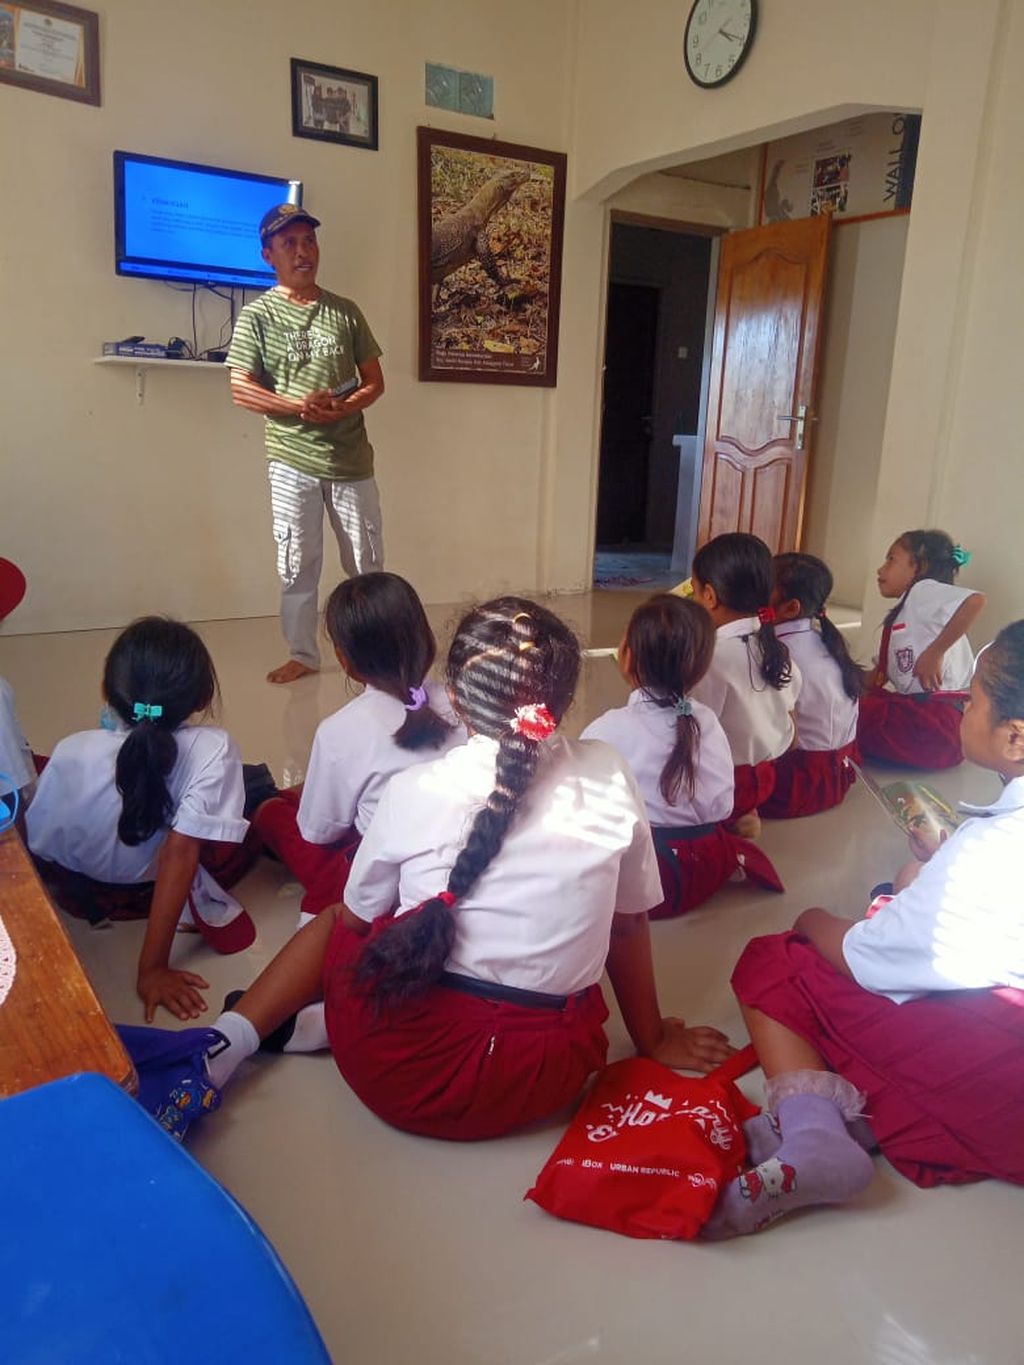 Arsyad socialized environmental preservation to elementary school students in Pota, East Manggarai, NTT in the Environmental Information Post that Arsyad built himself with his own money.